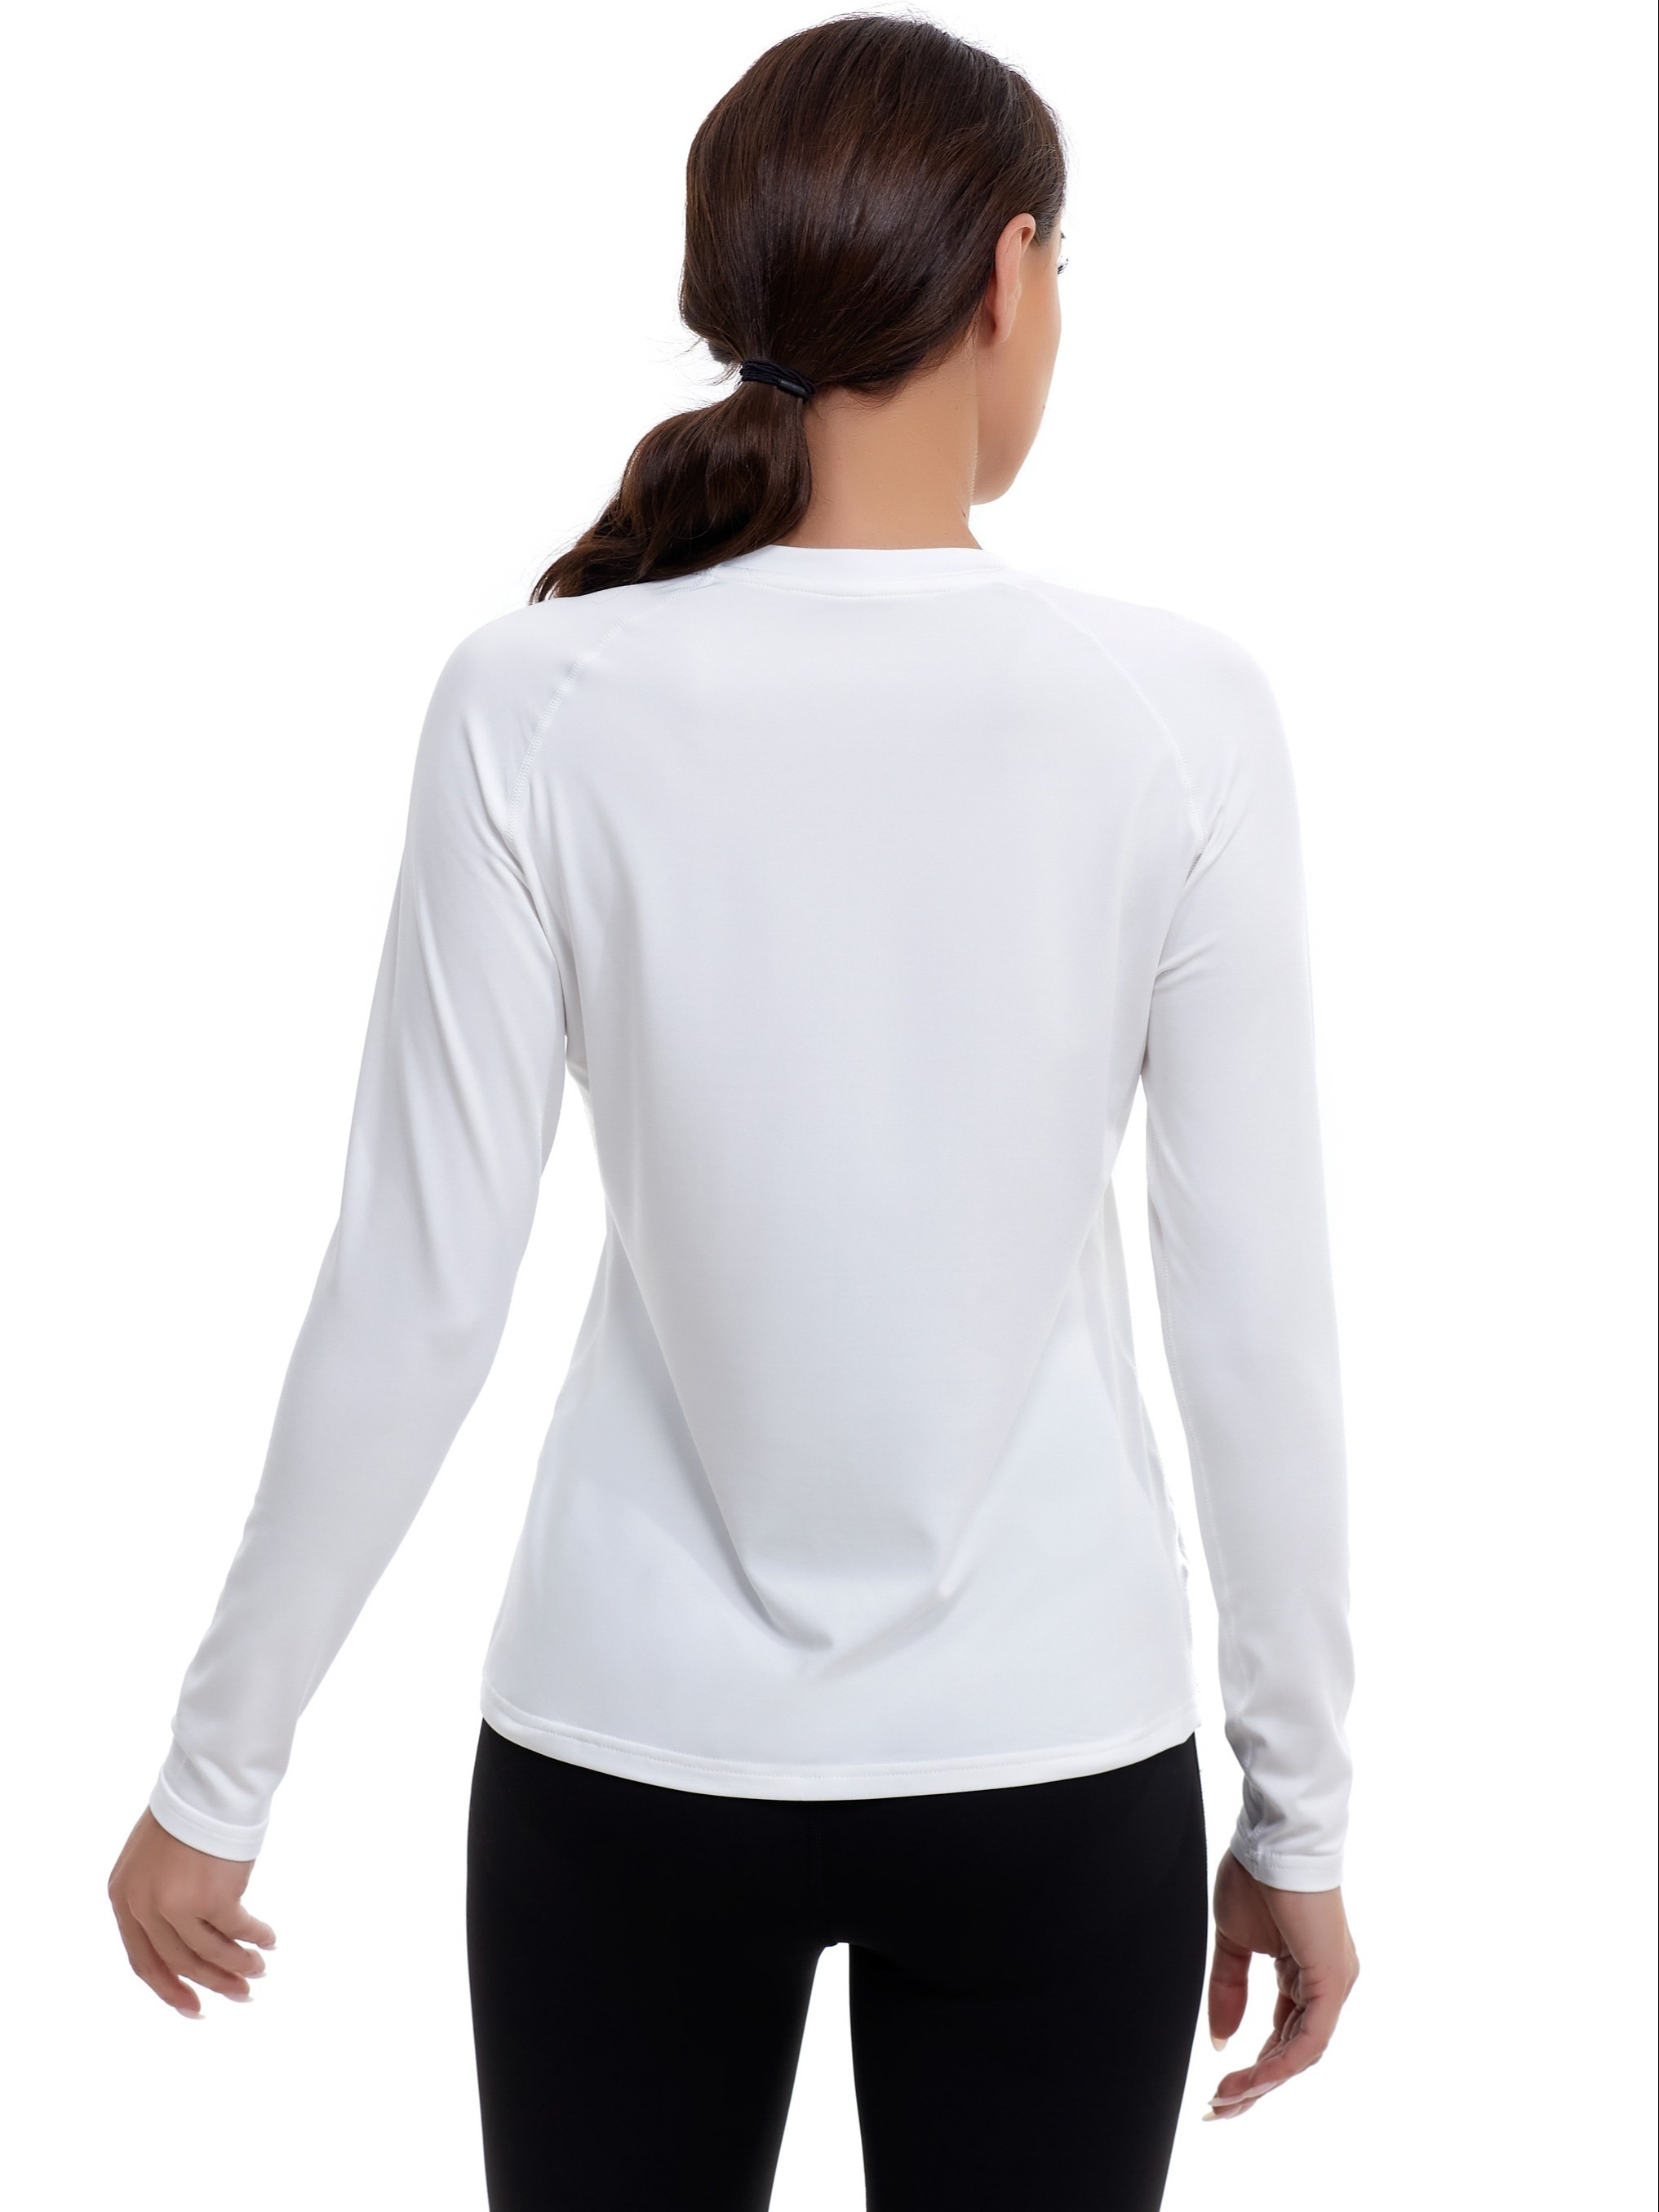  Womens Thermal Tops Fleece Lined Shirt Long Sleeve Base  Layer White XX-Large